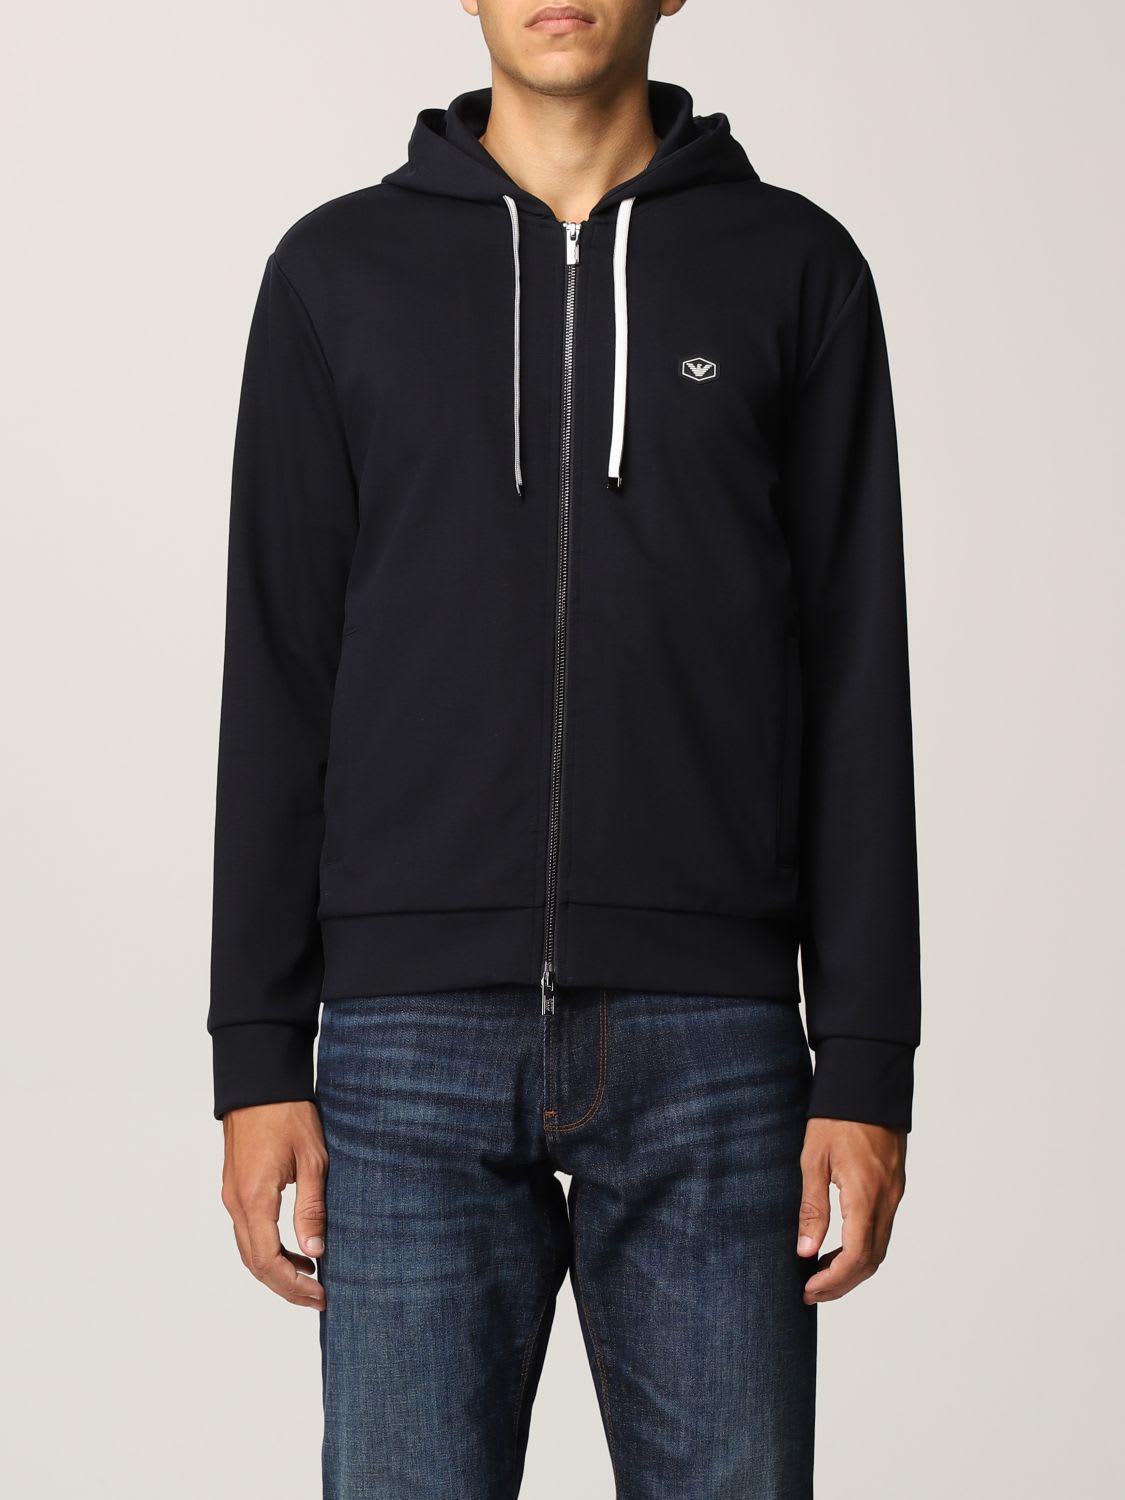 Emporio Armani Sweatshirt Emporio Armani Sweatshirt In Cotton Blend With Eagle Logo